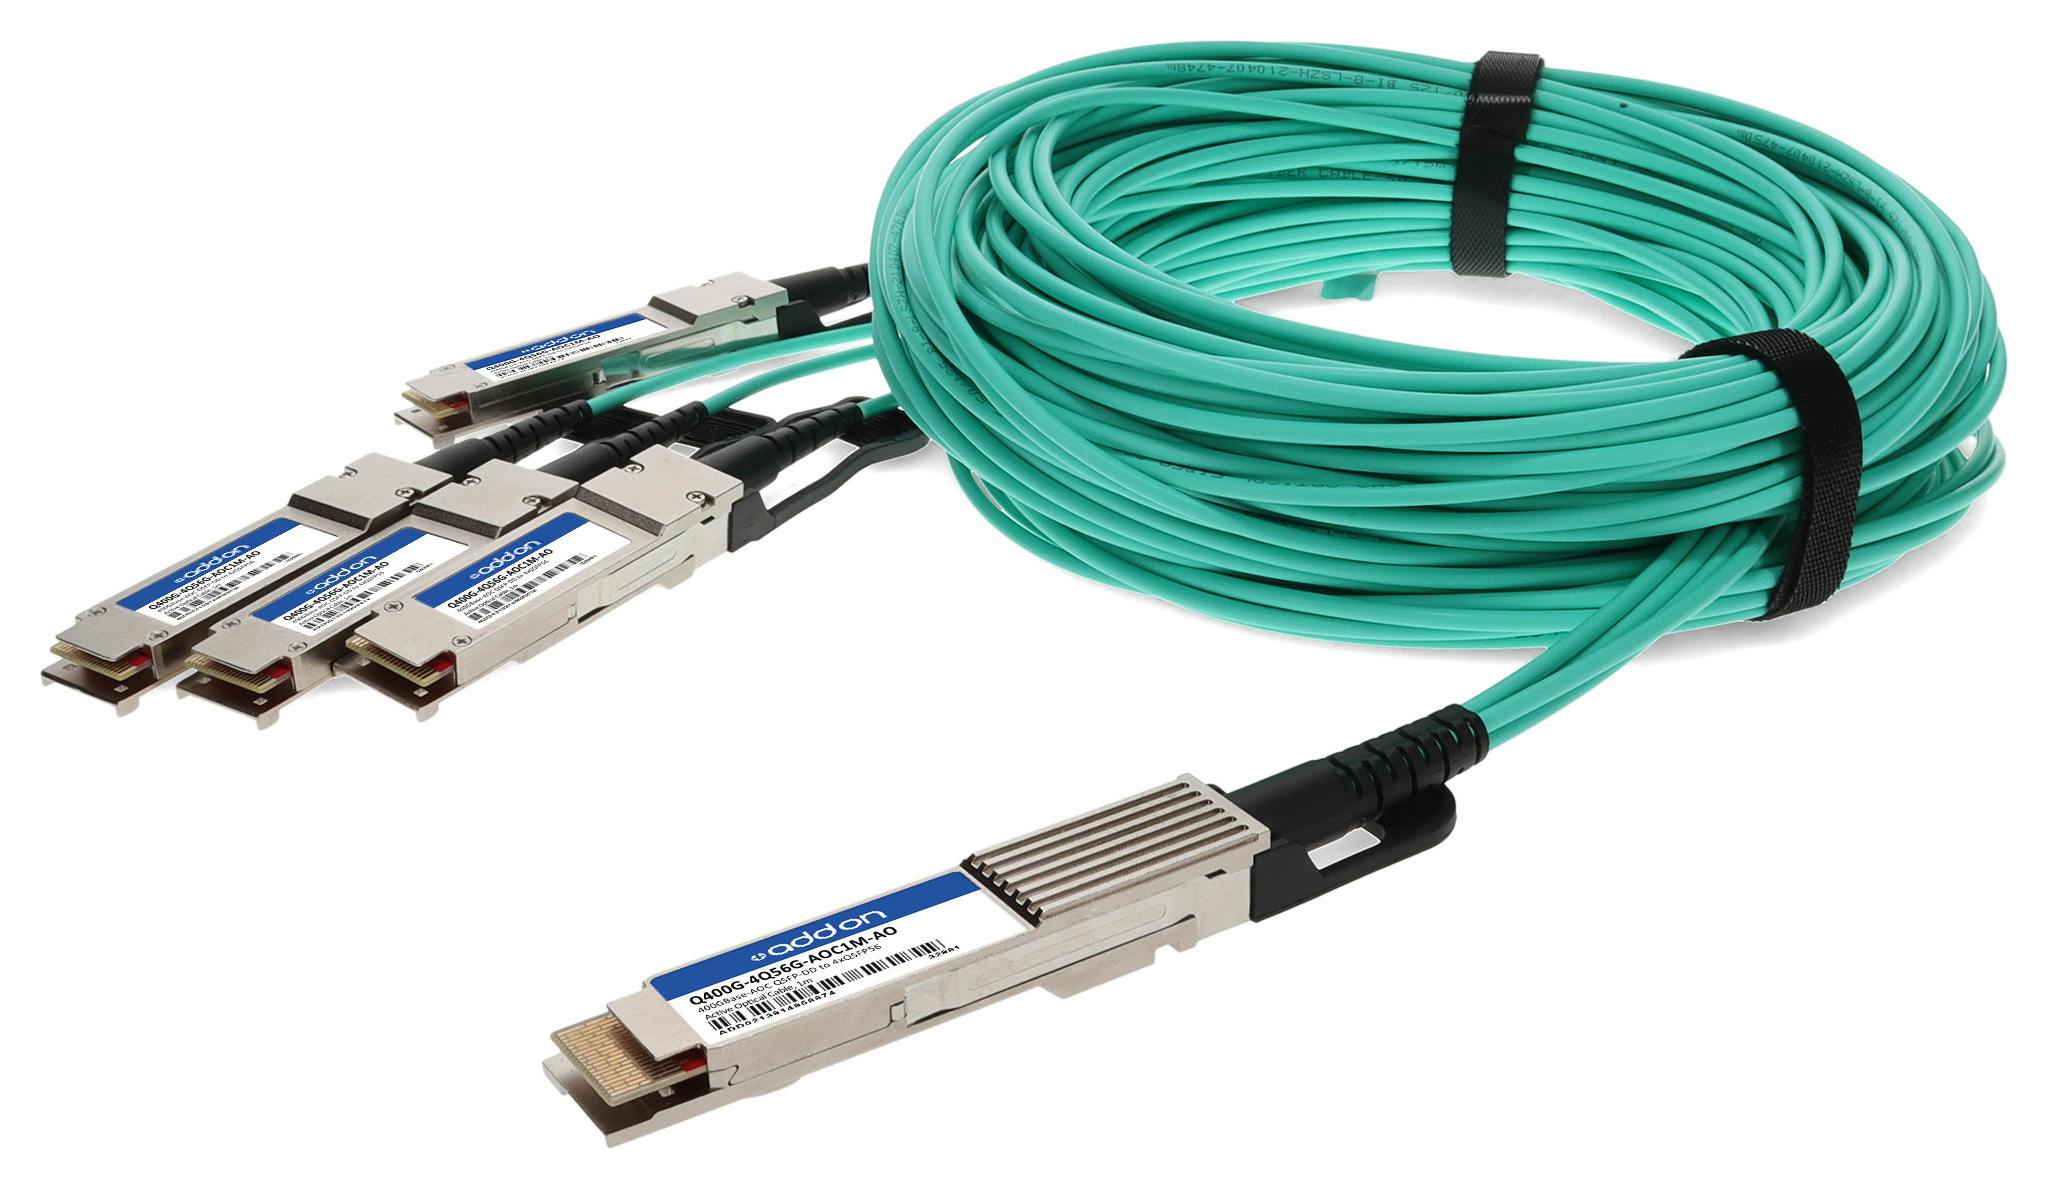 QSFP-DD breakout AOC cables from AddOn